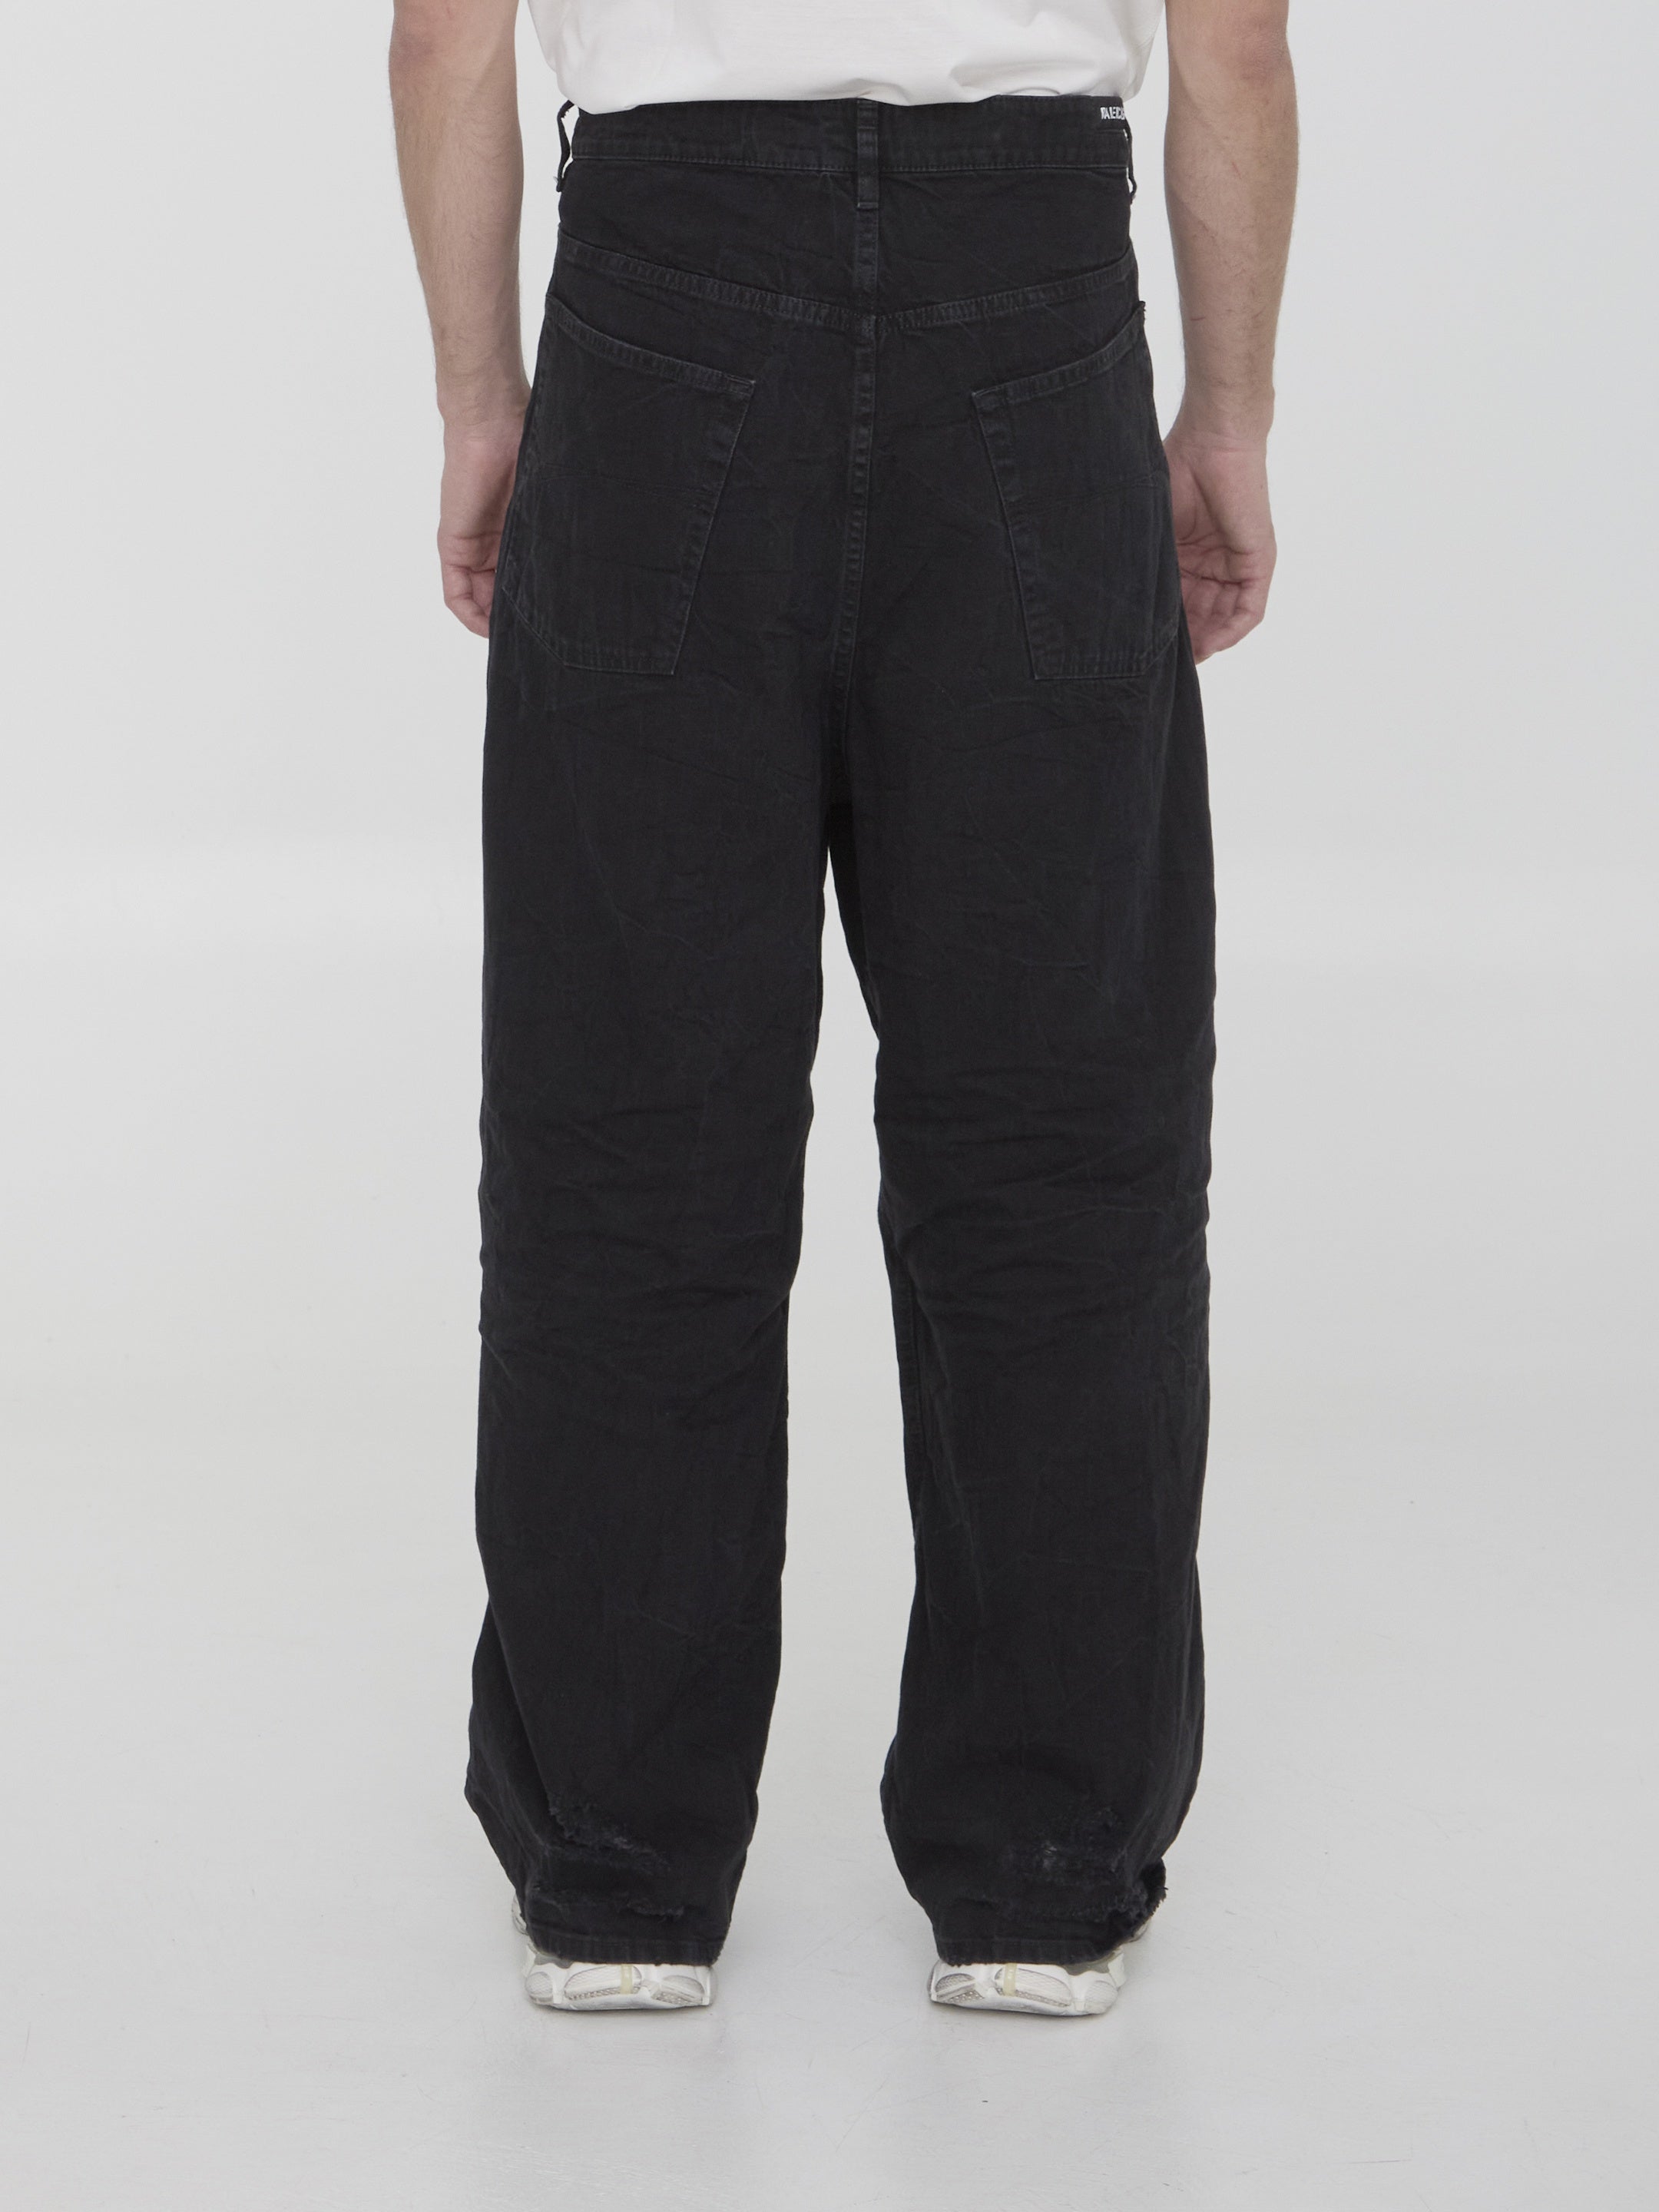 BALENCIAGA-OUTLET-SALE-Baggy-trousers-CLOTHING-S-BLACK-ARCHIVE-COLLECTION-4.jpg